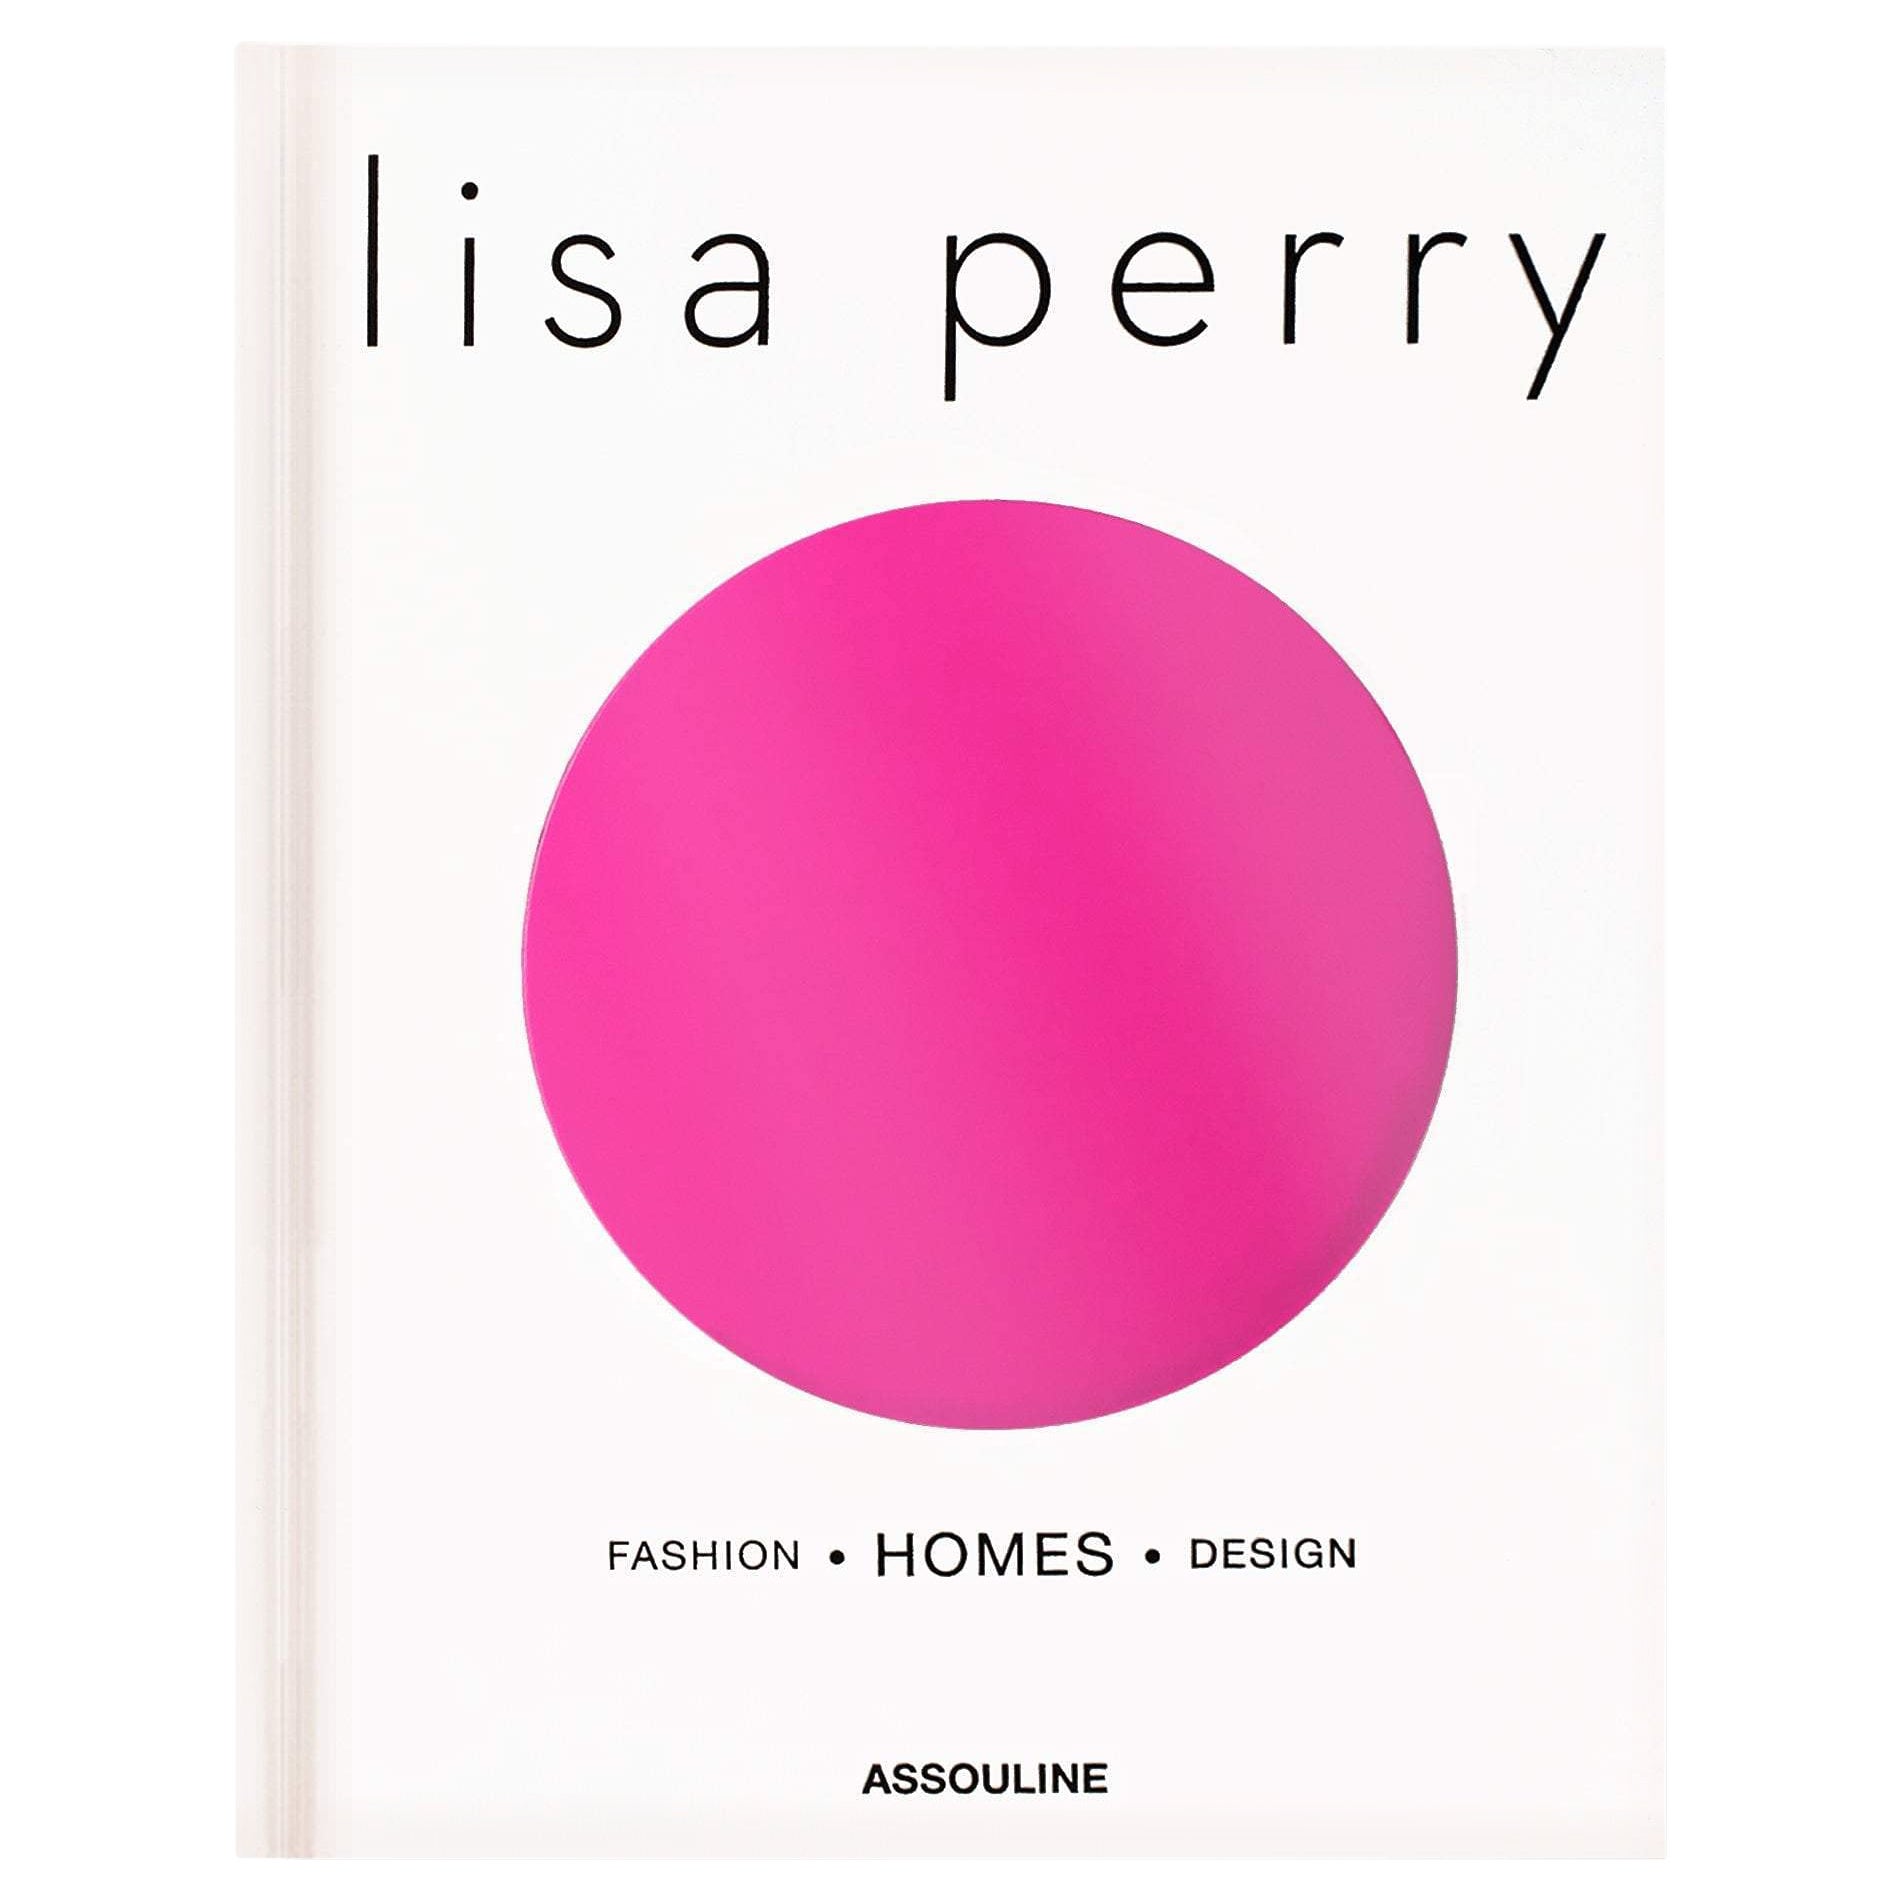 In Stock in Los Angeles, Lisa Perry Fashion Homes Design, Assouline